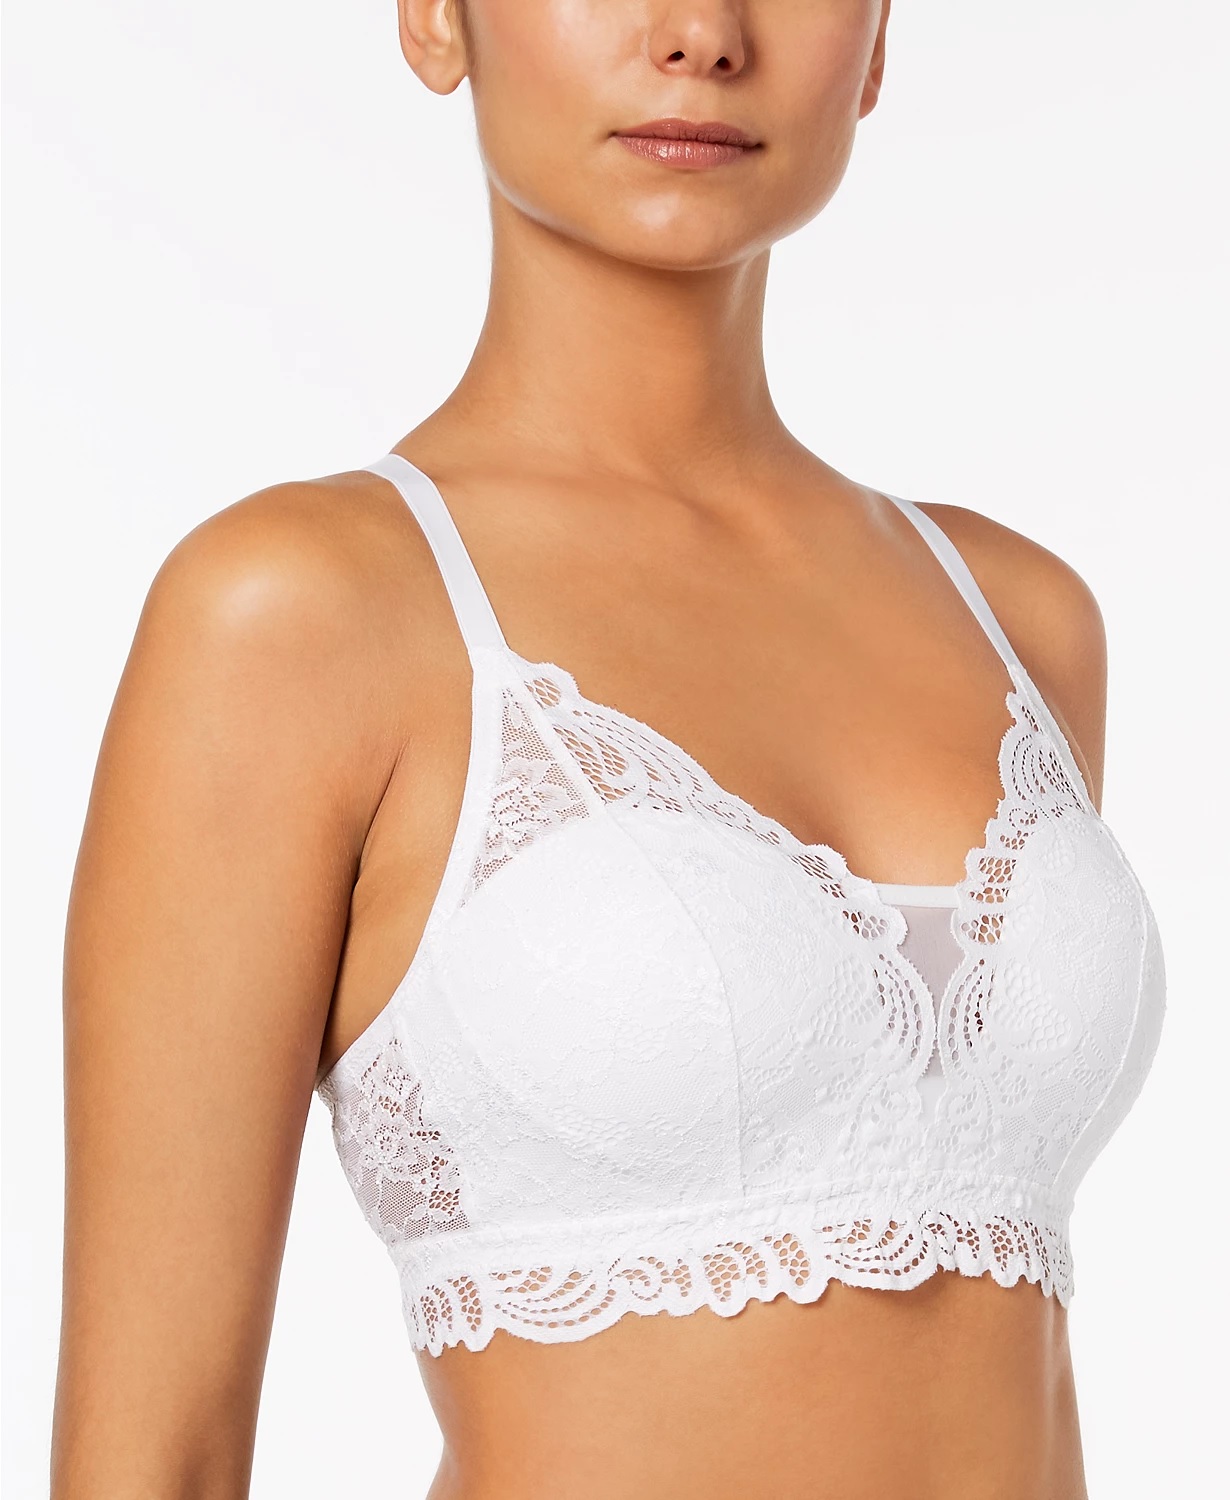 Deagia Clearance Extreme Comfort Bralettes Daily Women Lace